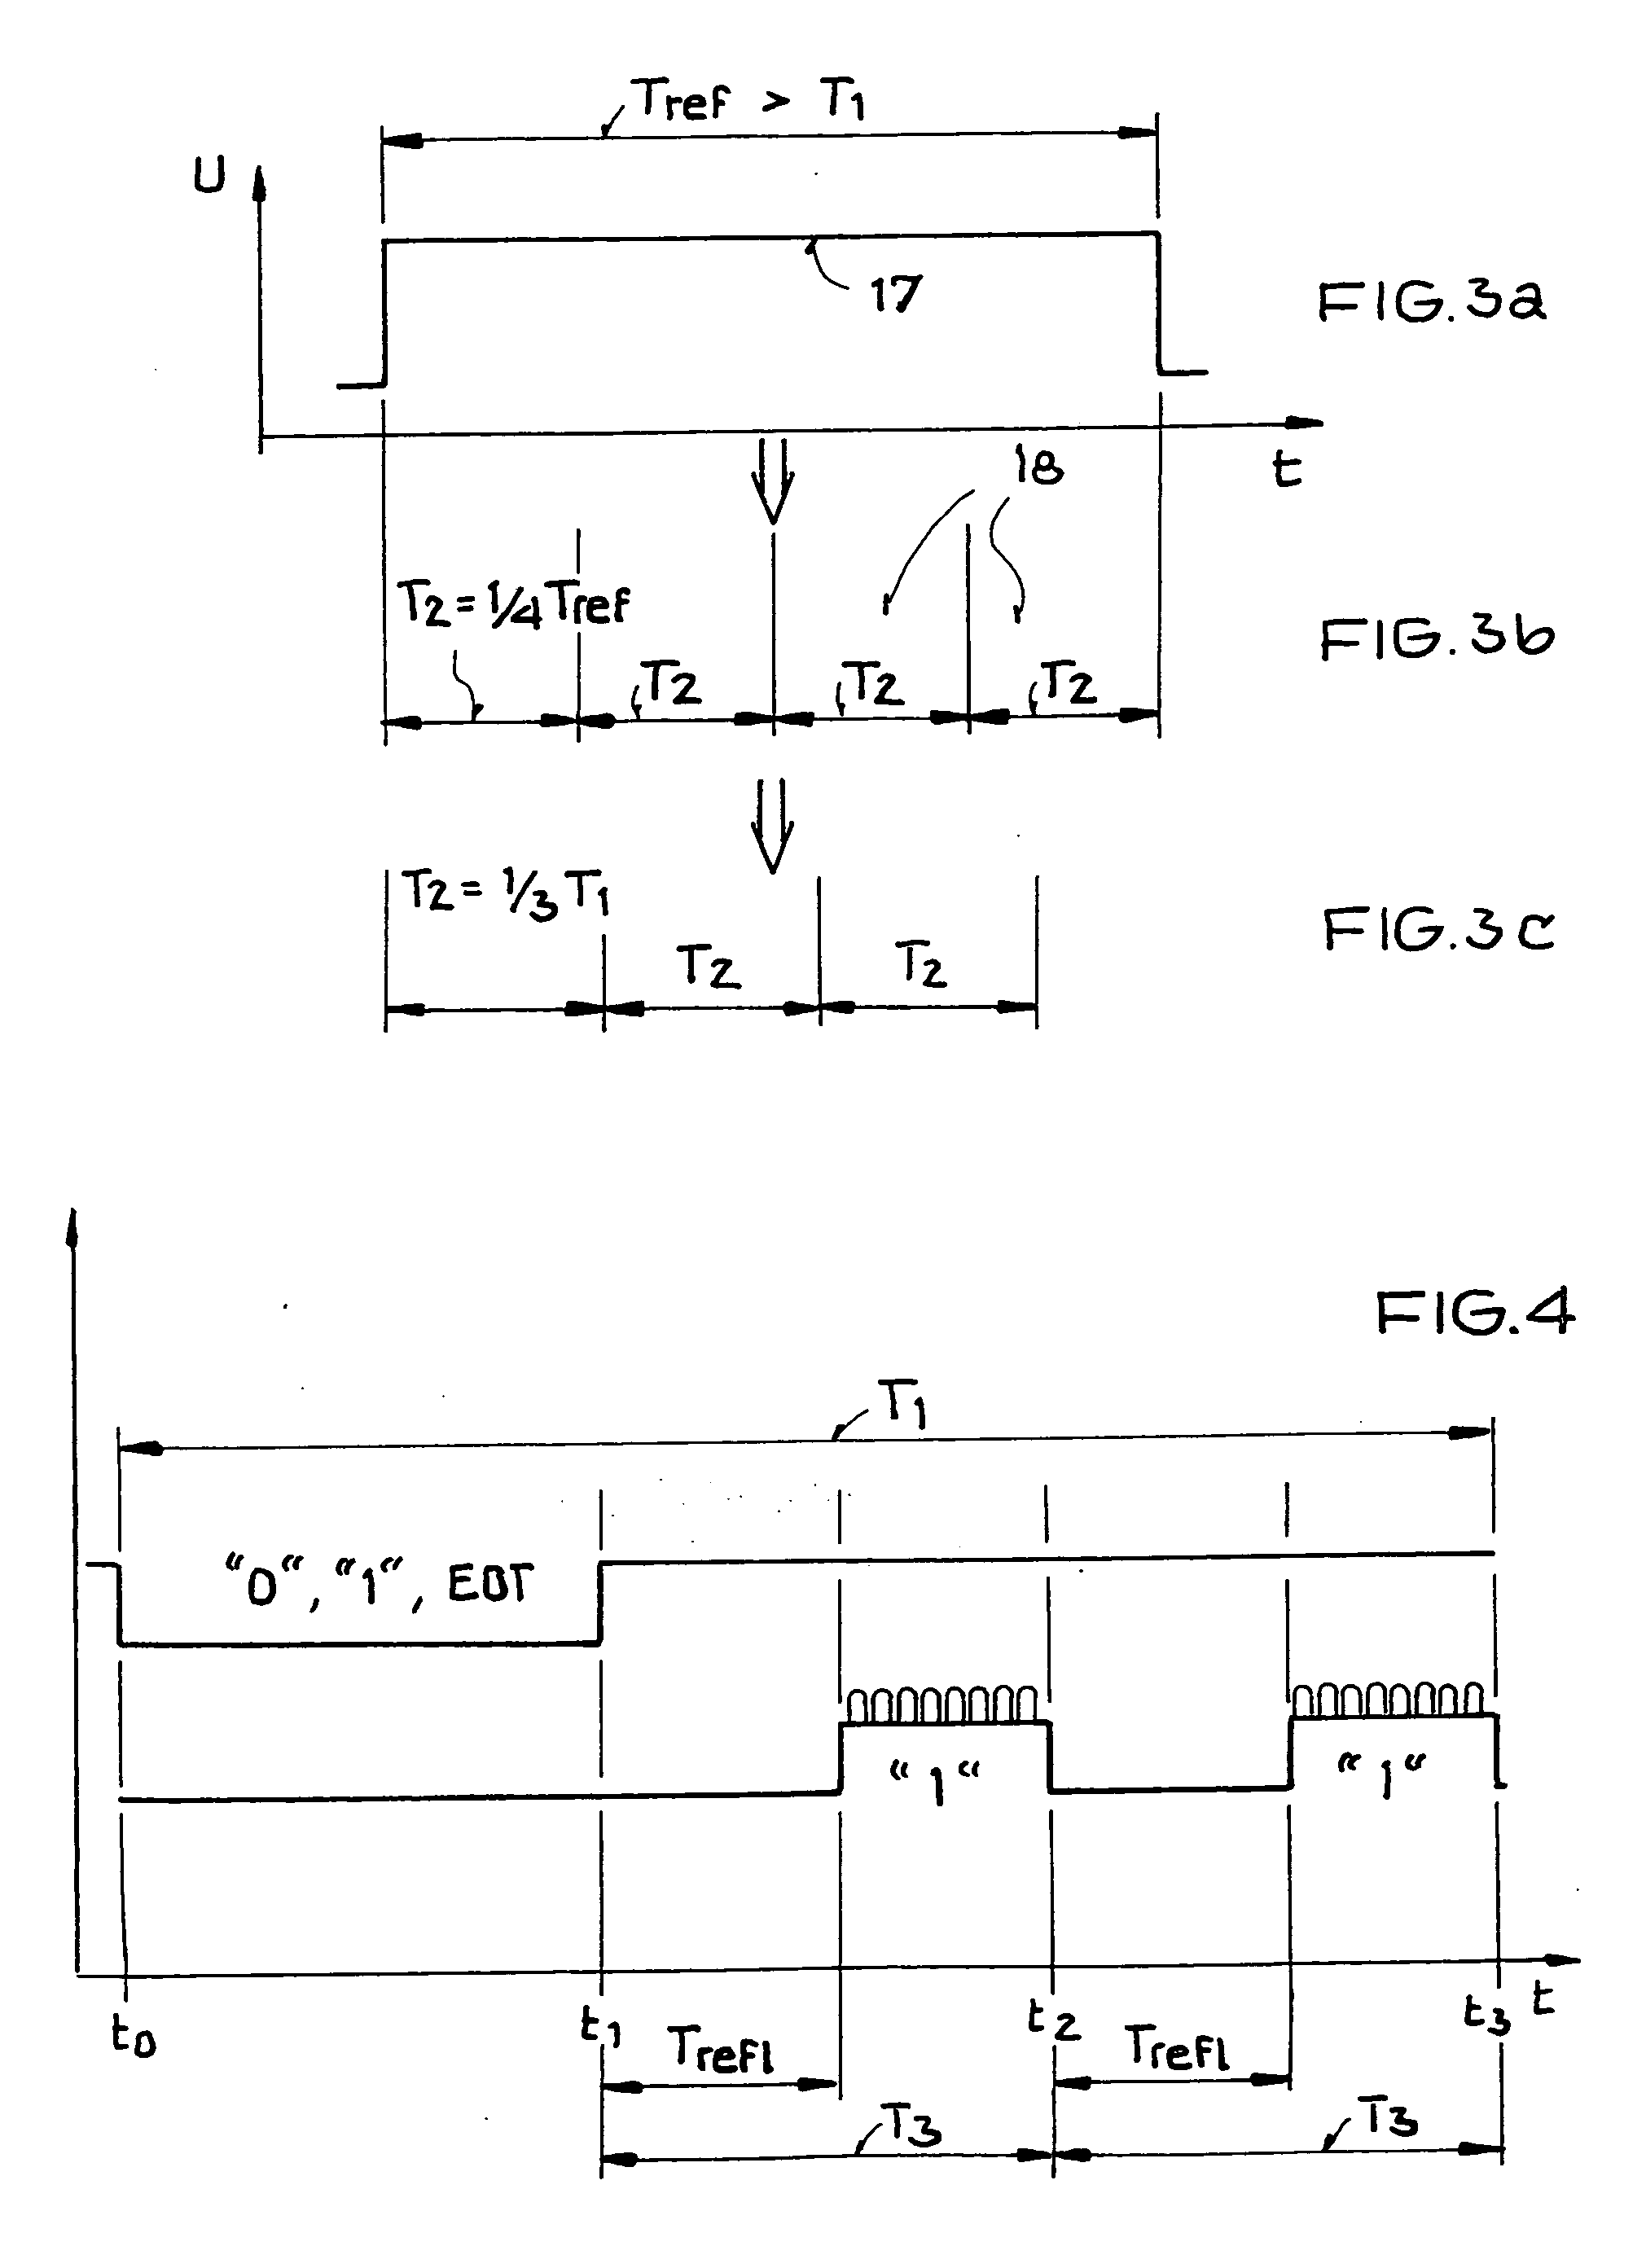 Selection method for data communication between base station and transponders